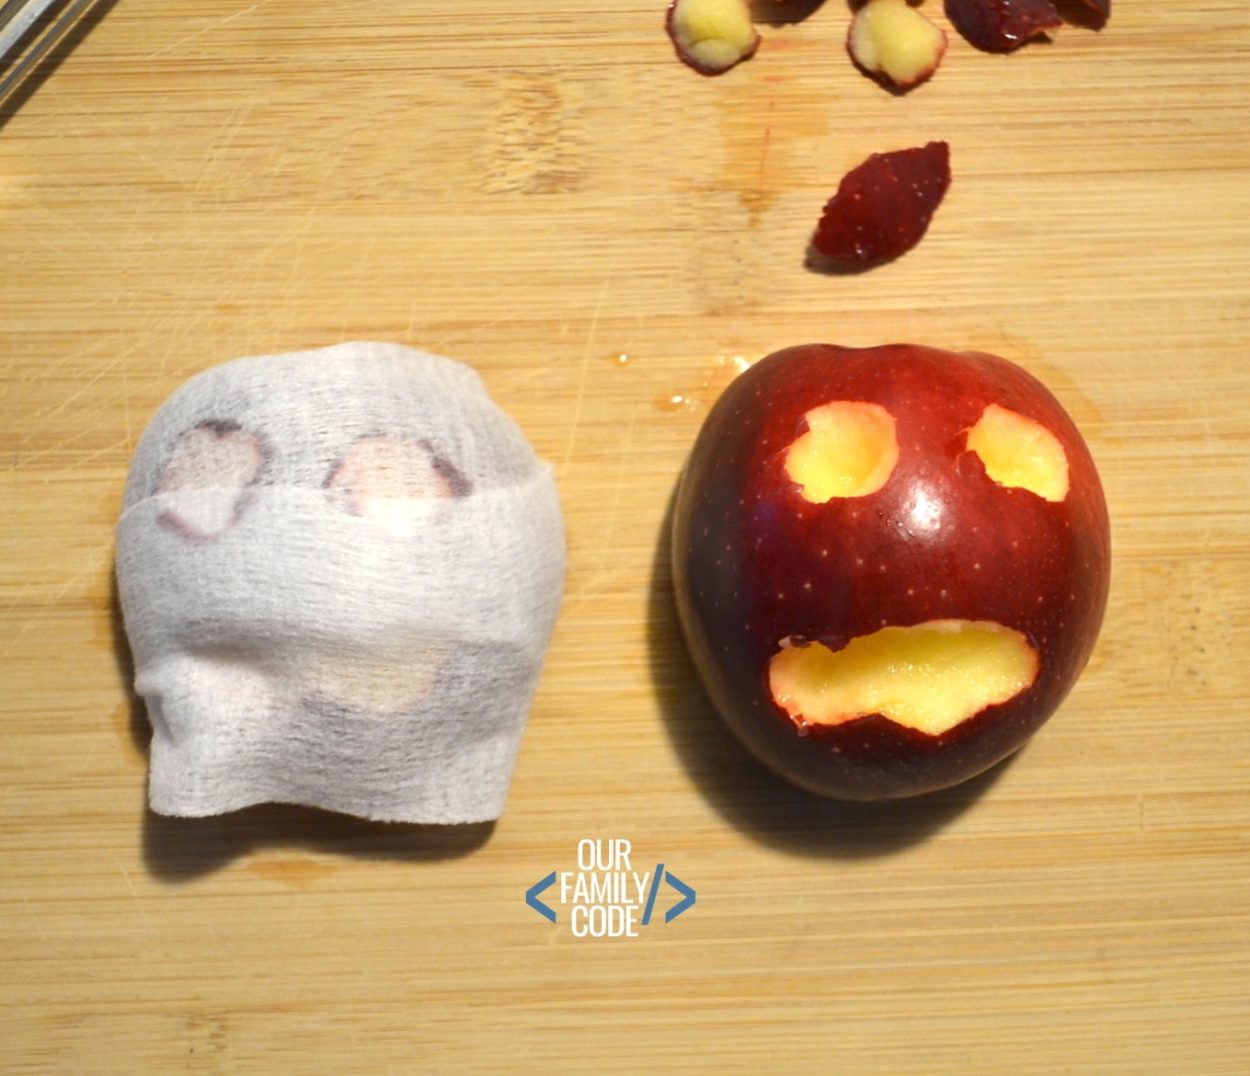 A picture of an apple mummy and a carved apple face.